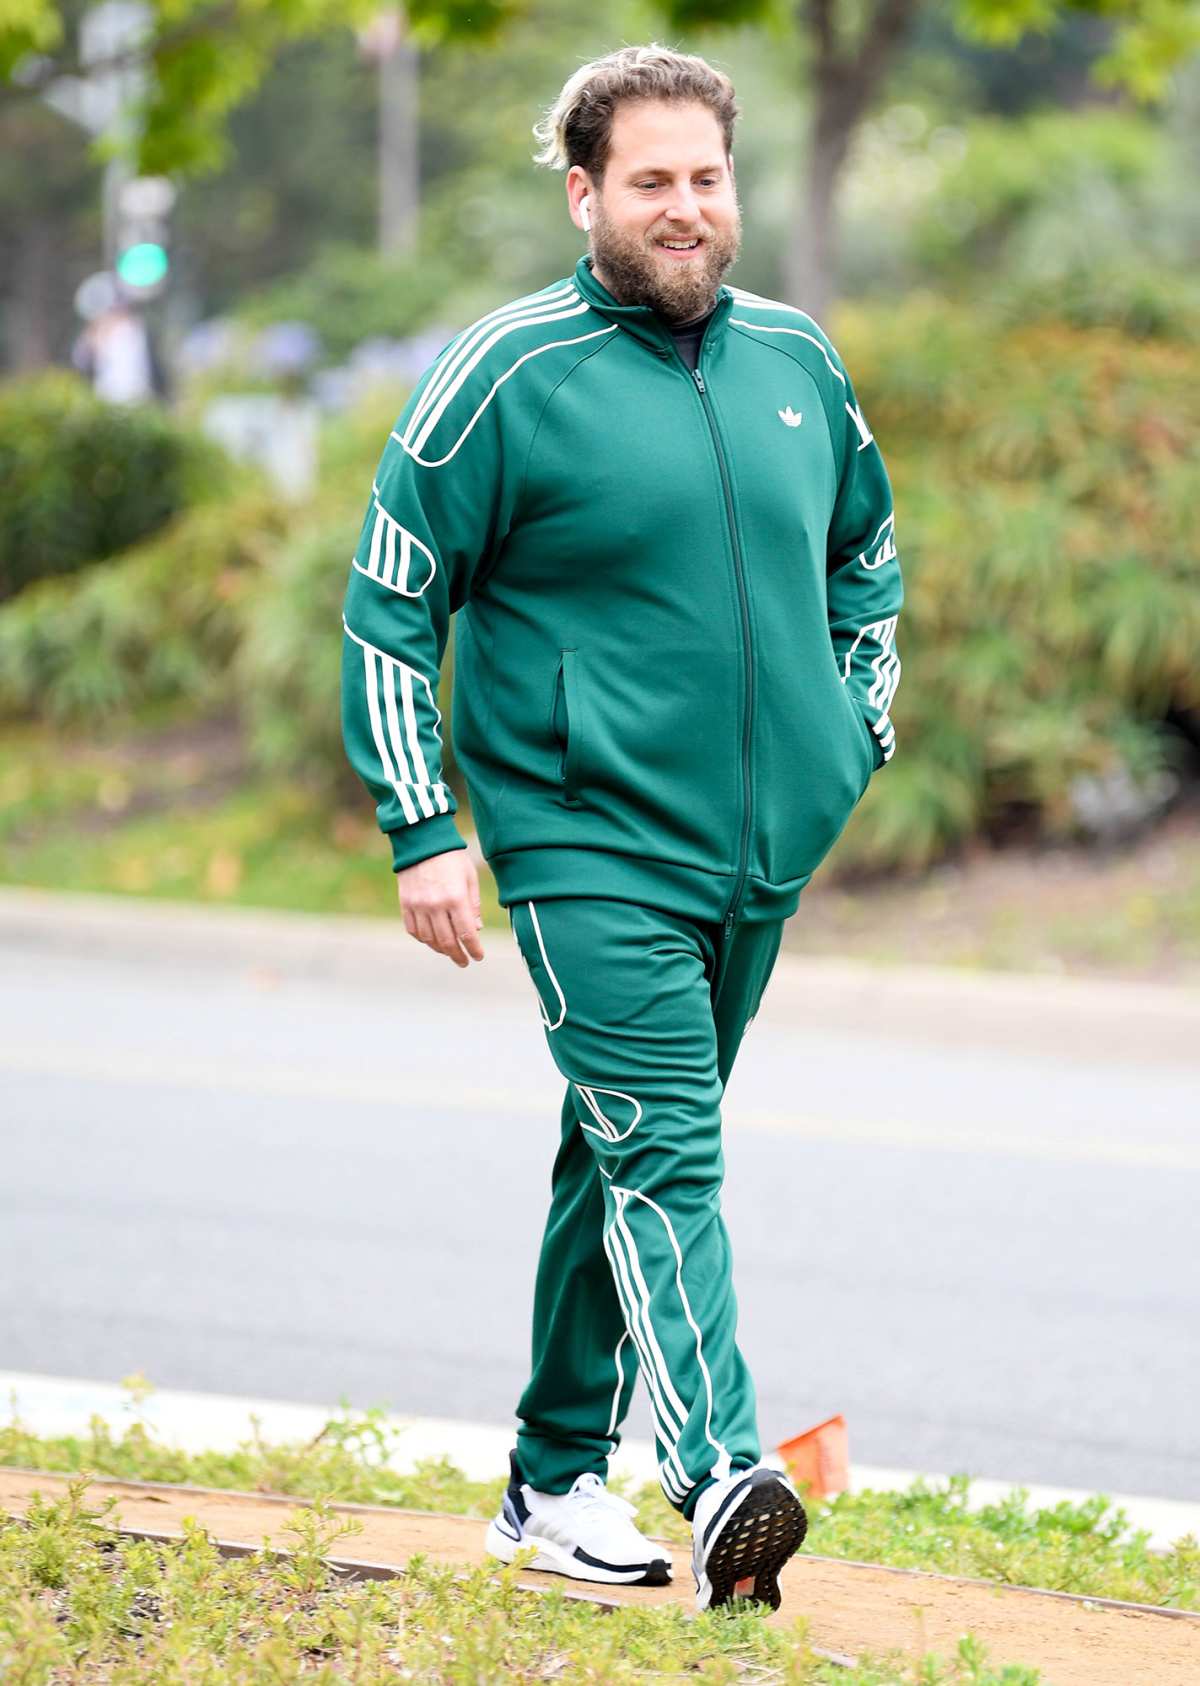 Jonah Hill Opens Up About Weight Loss, Body Image Struggles On Ellen